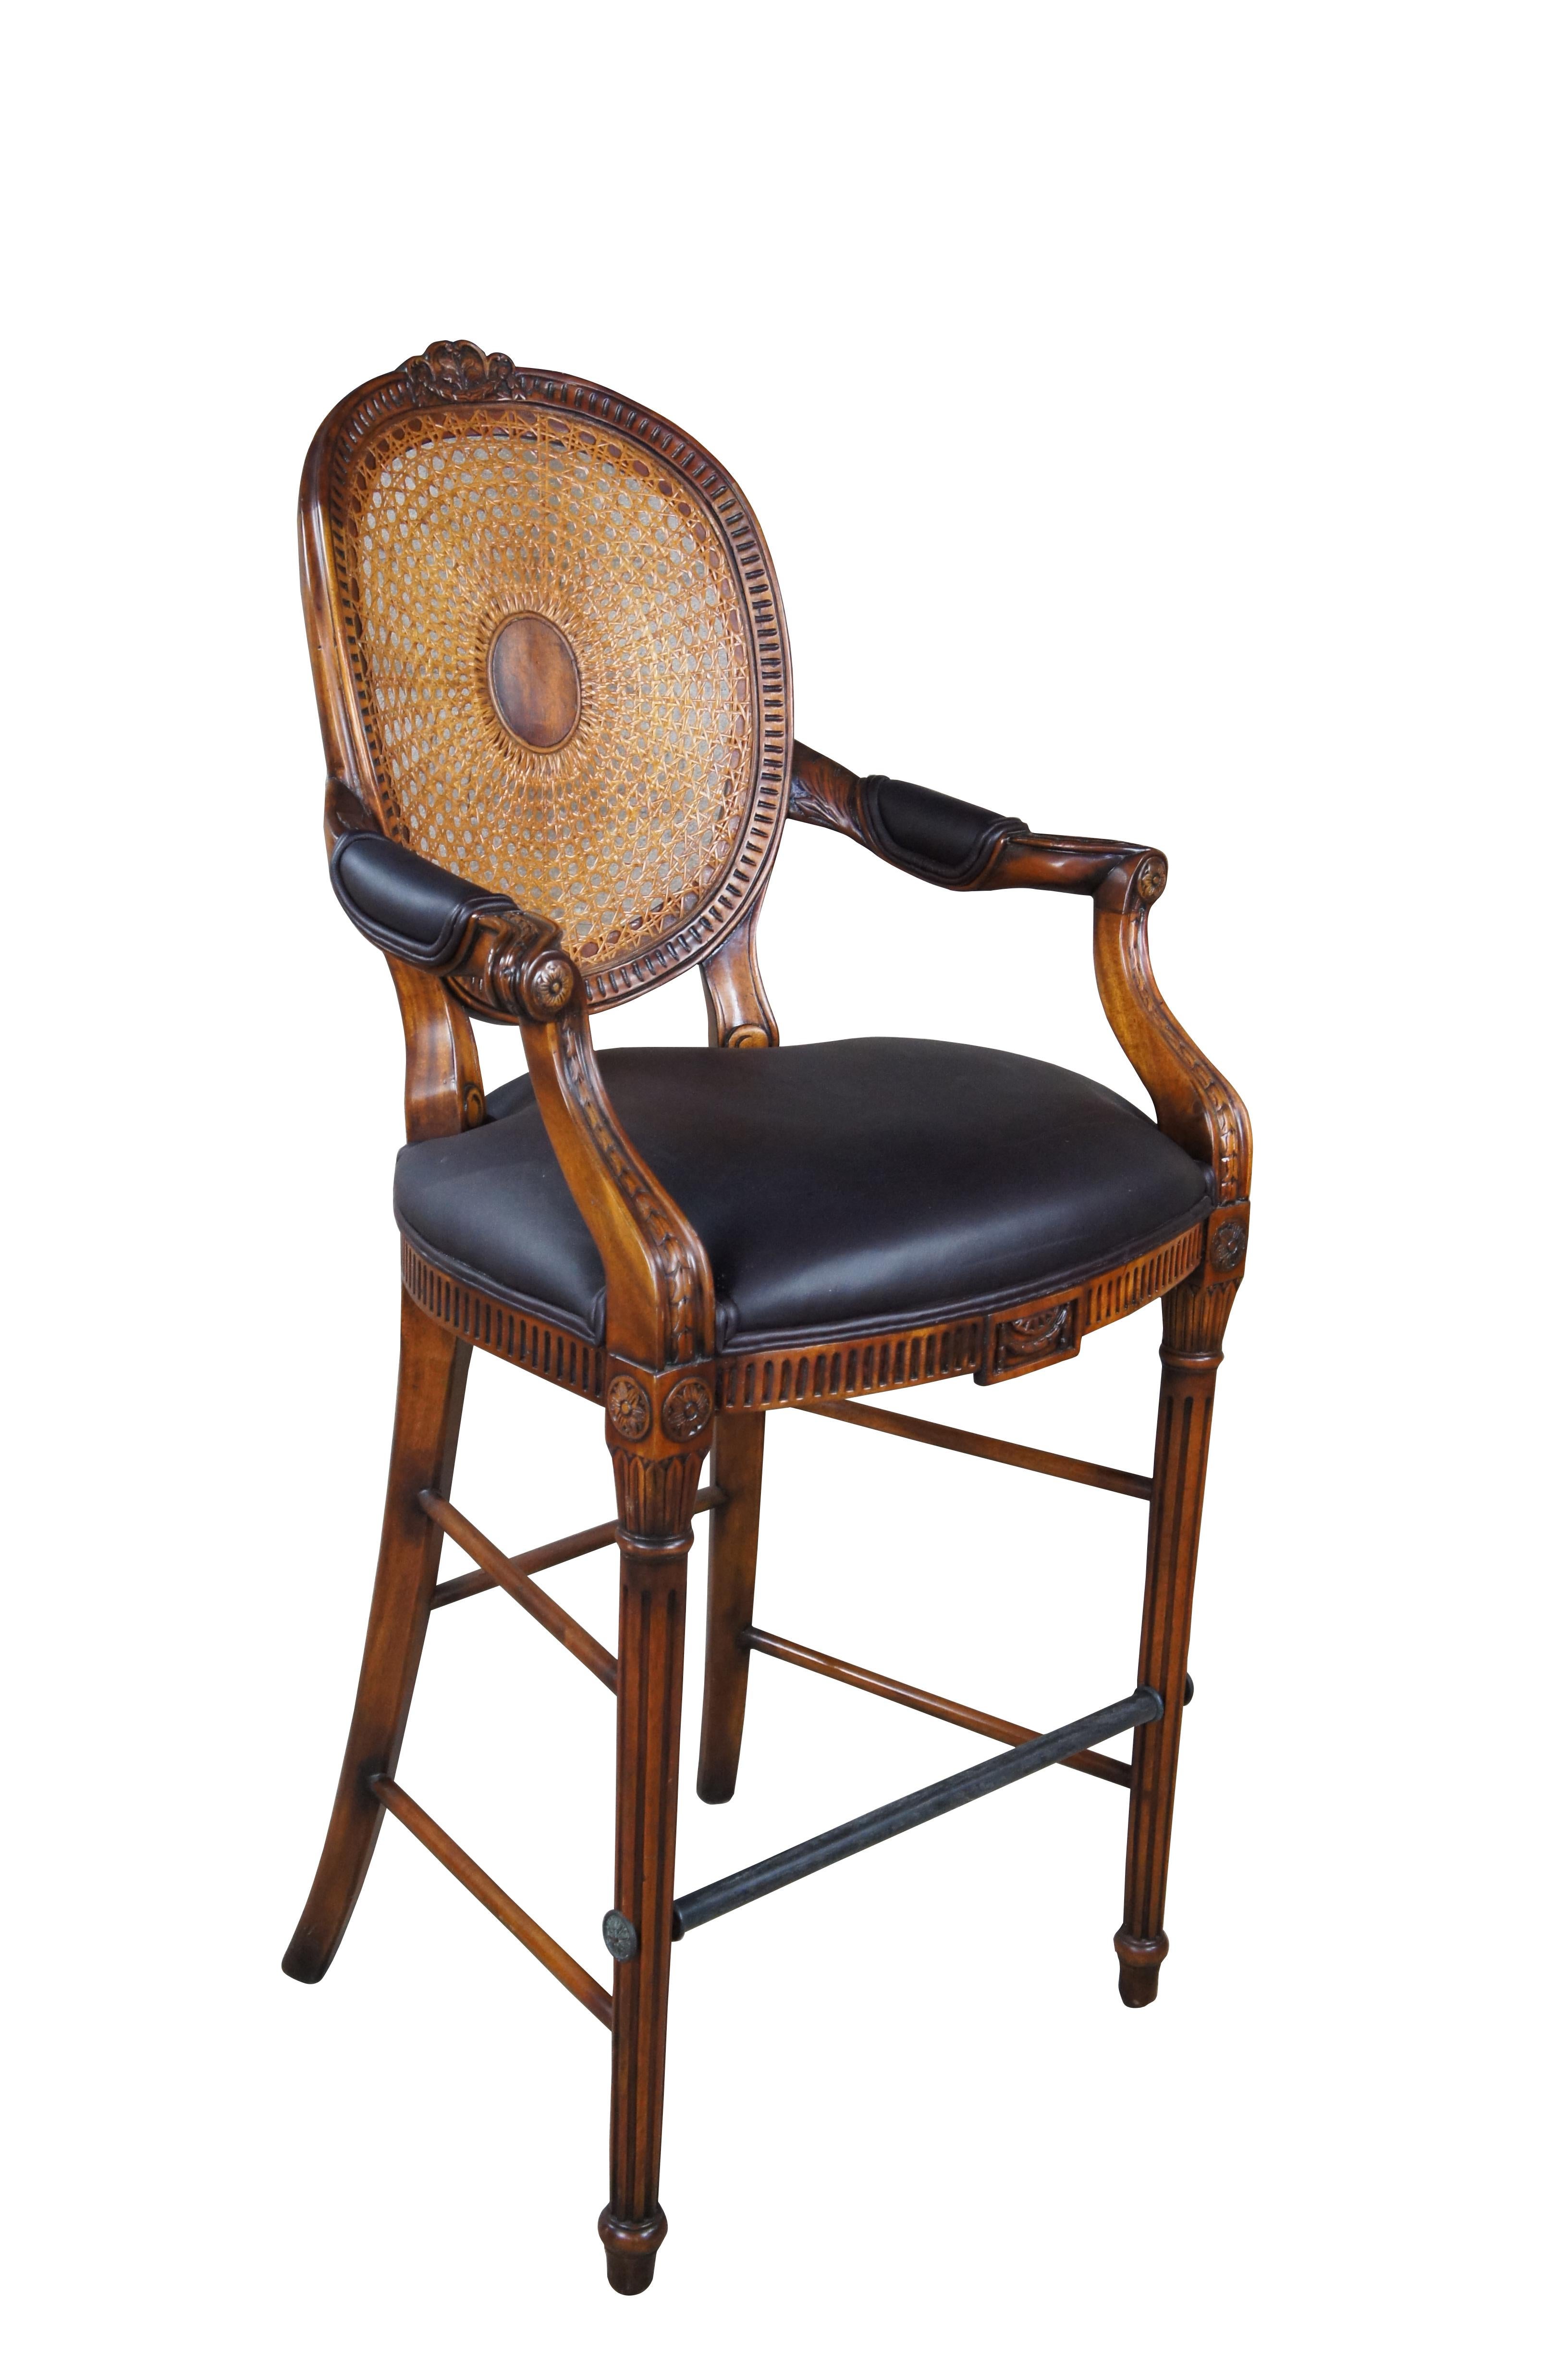 Theodore Alexander French Louis XV Bar Stool. Made from mahogany with cane back, padded arms, brown leather seat and turned fluted legs leading to foot rest and turnip feet.   The chair is carved with traditional French medallions, fluting and